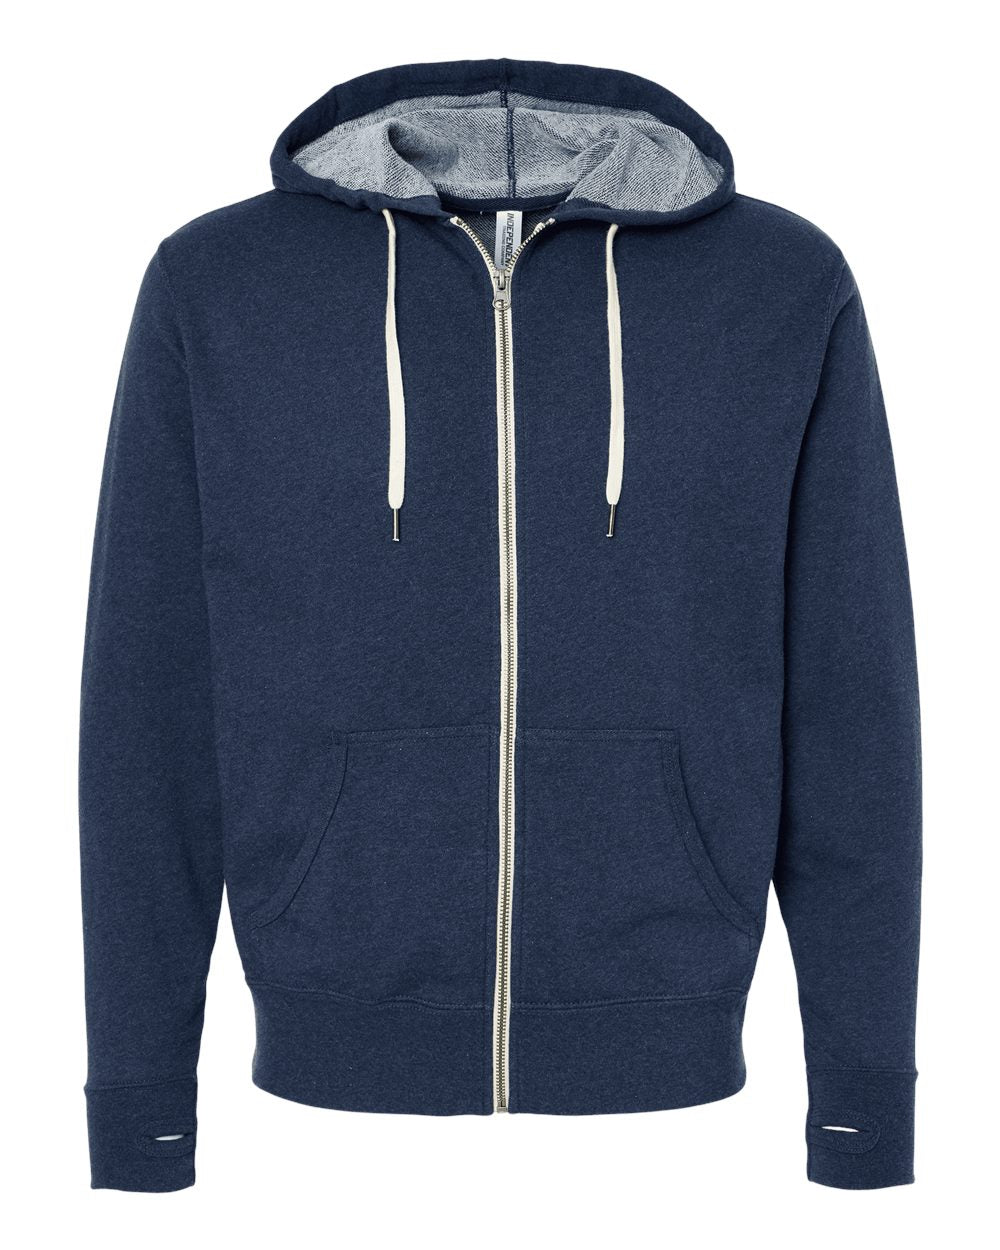 Independent Trading Co. - Heathered French Terry Full-Zip Hooded Sweatshirt